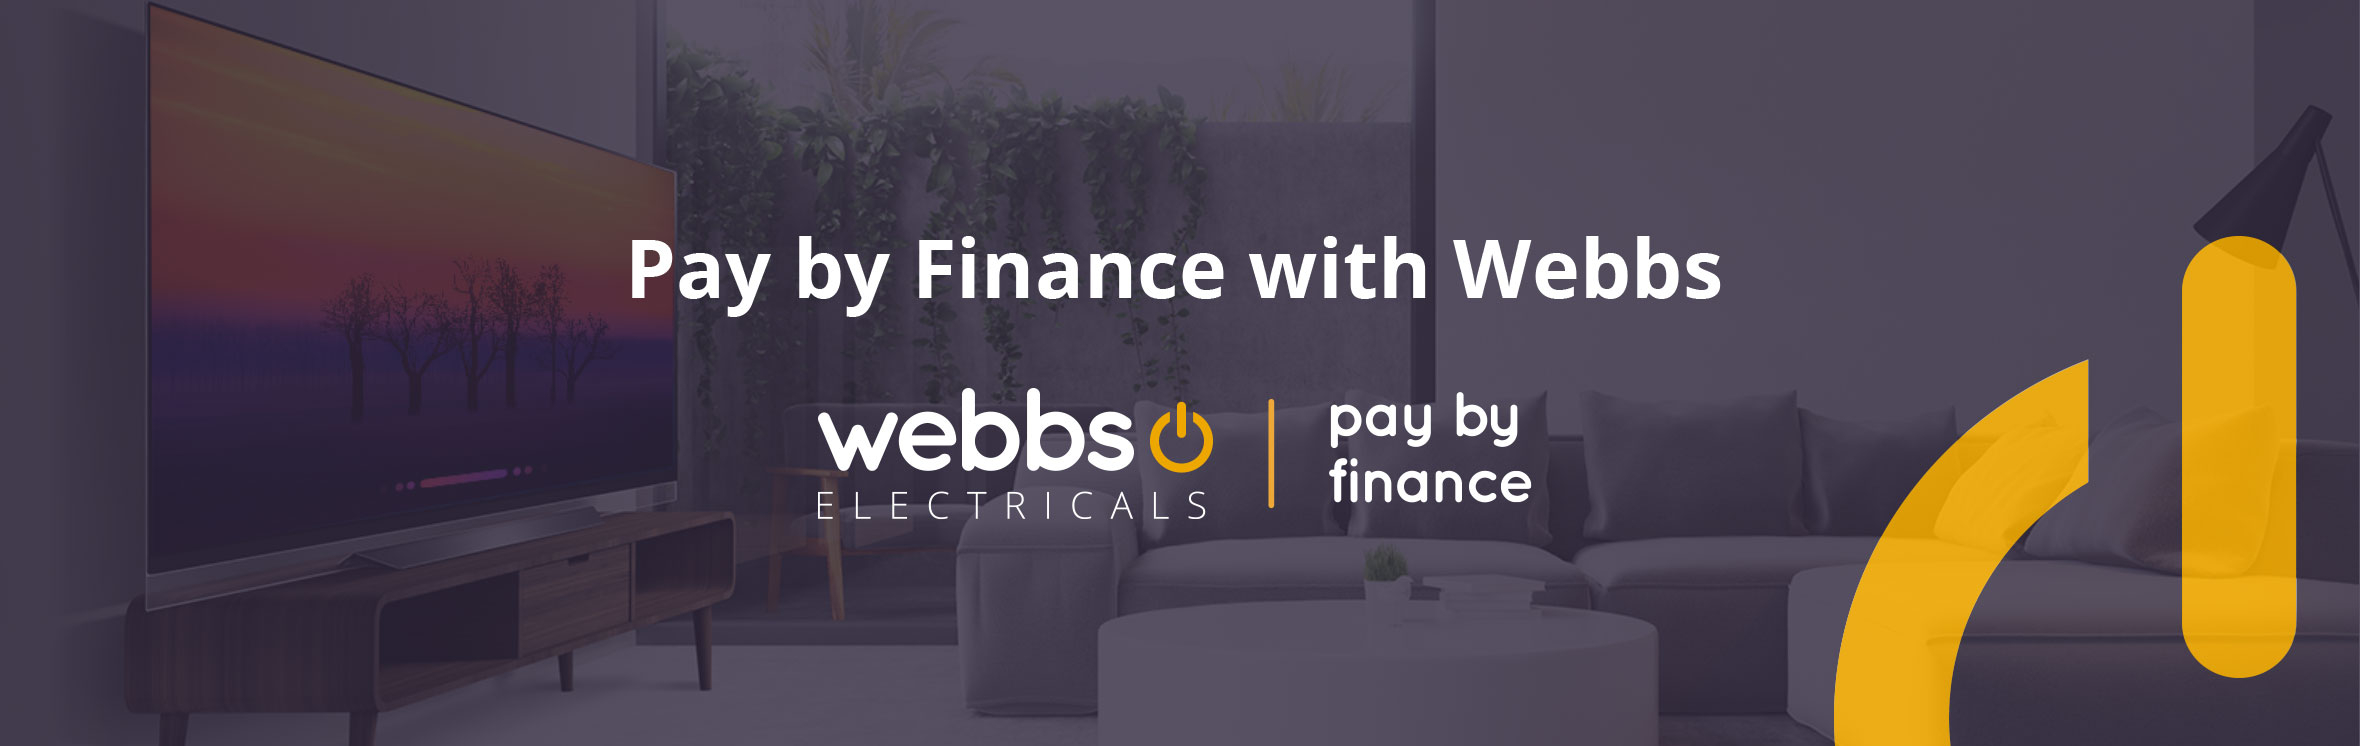 Pay by Finance with Webbs